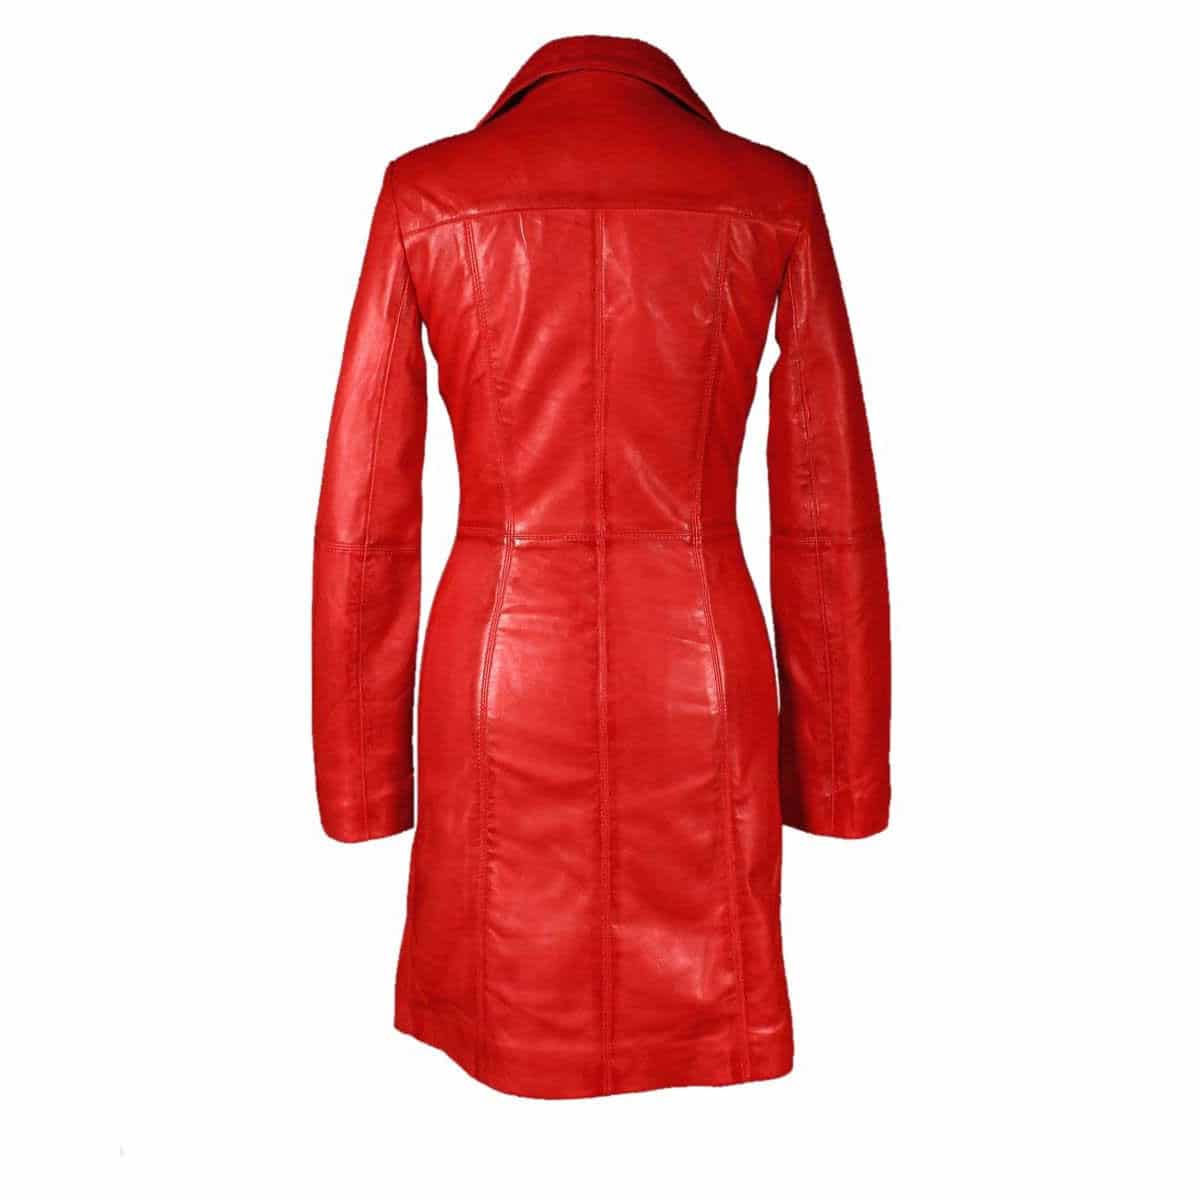 Women Red Cow Leather Steampunk Goth Style Trench Coat  - T16-RED